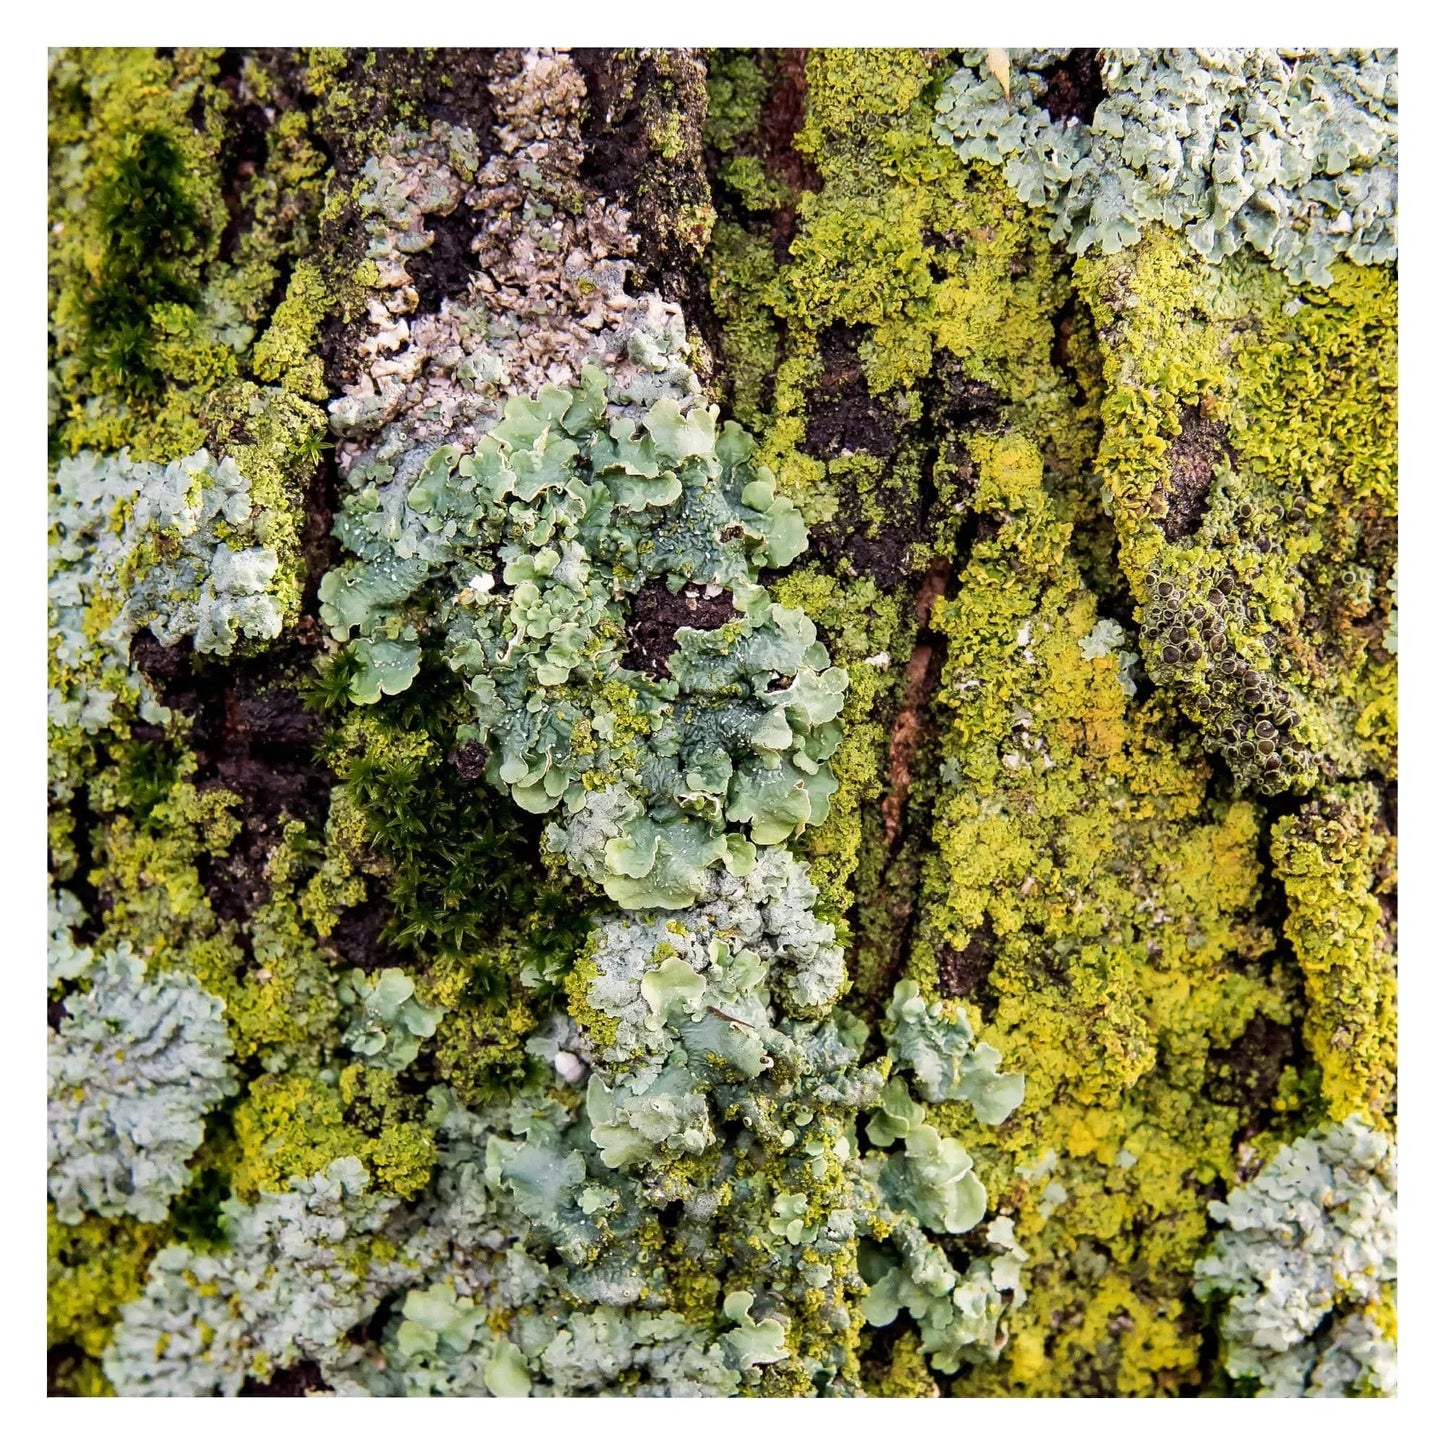 Photograph of bright green and teal moss lichen on tree bark